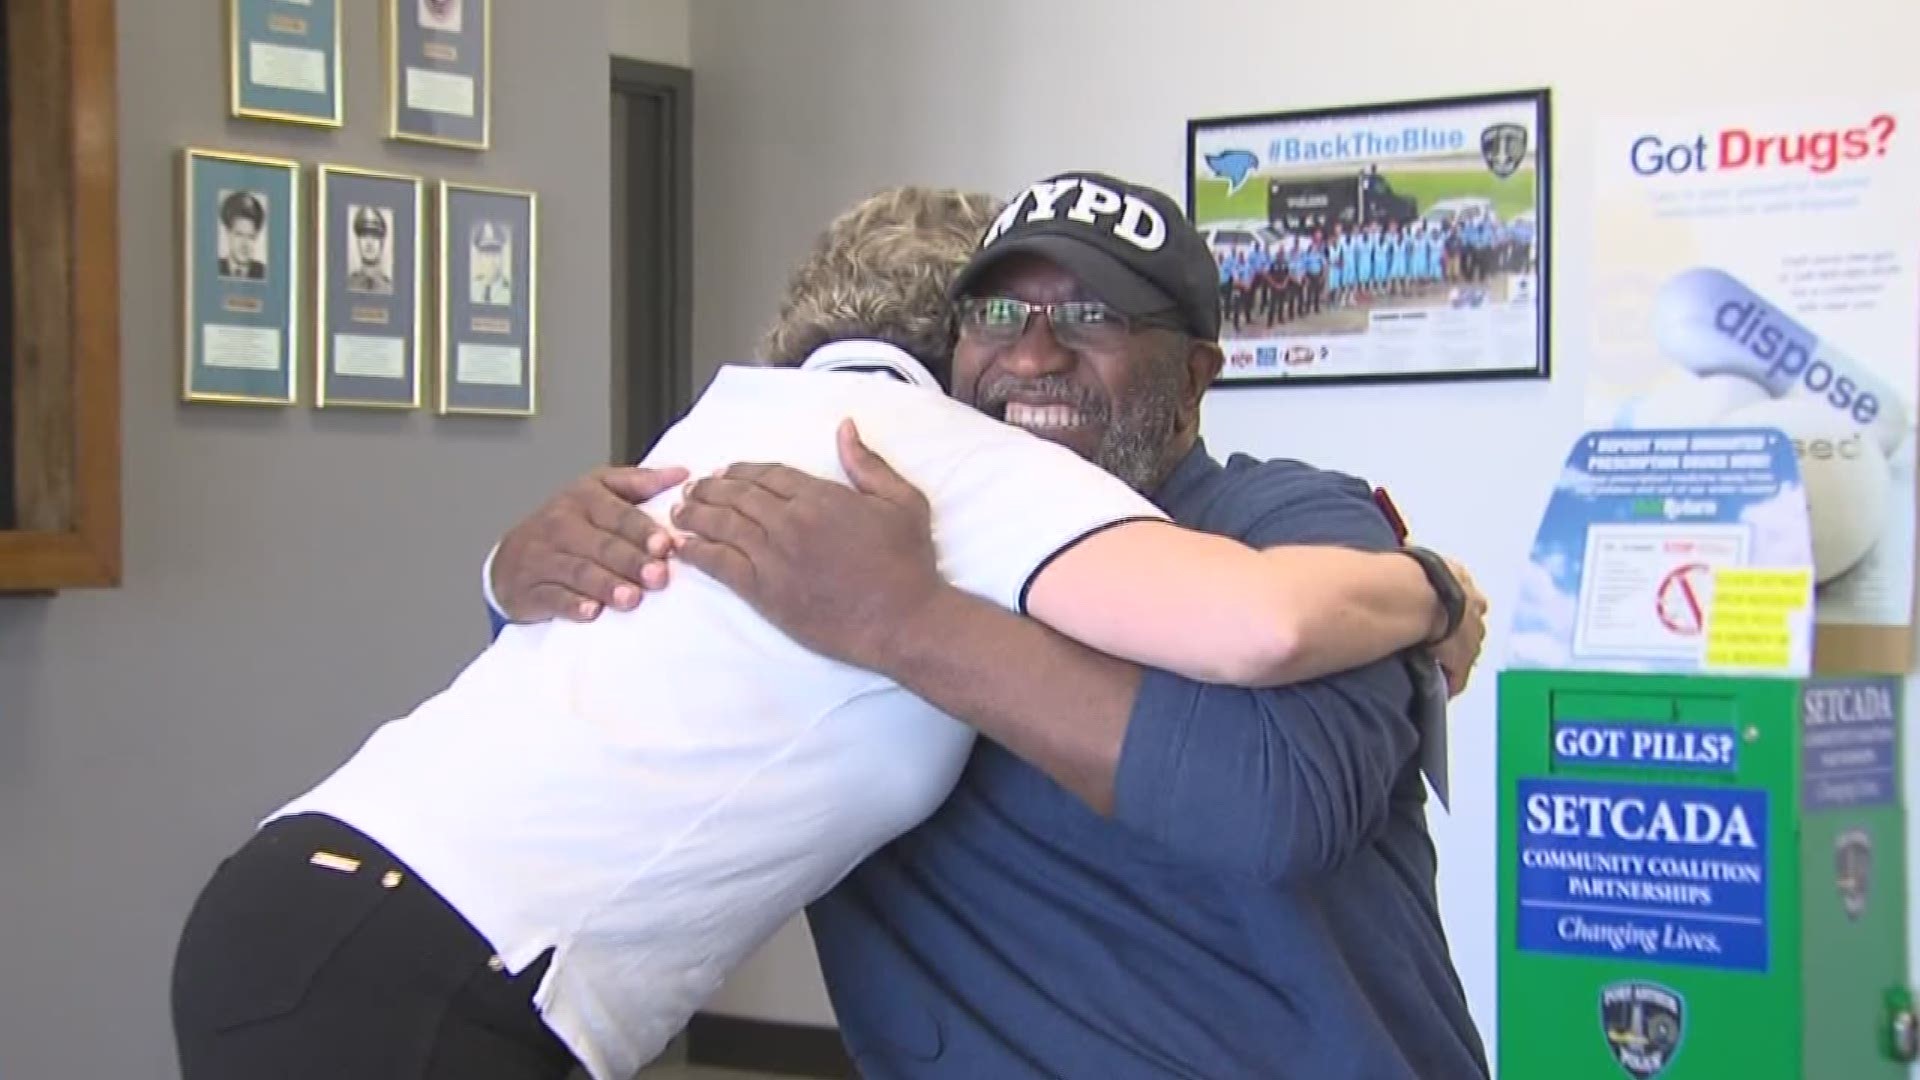 Sly Jones is a dispatcher for the Port Arthur Police Department, and even though he's wheelchair bound, he has decided to make an impact in his community with a generous donation.